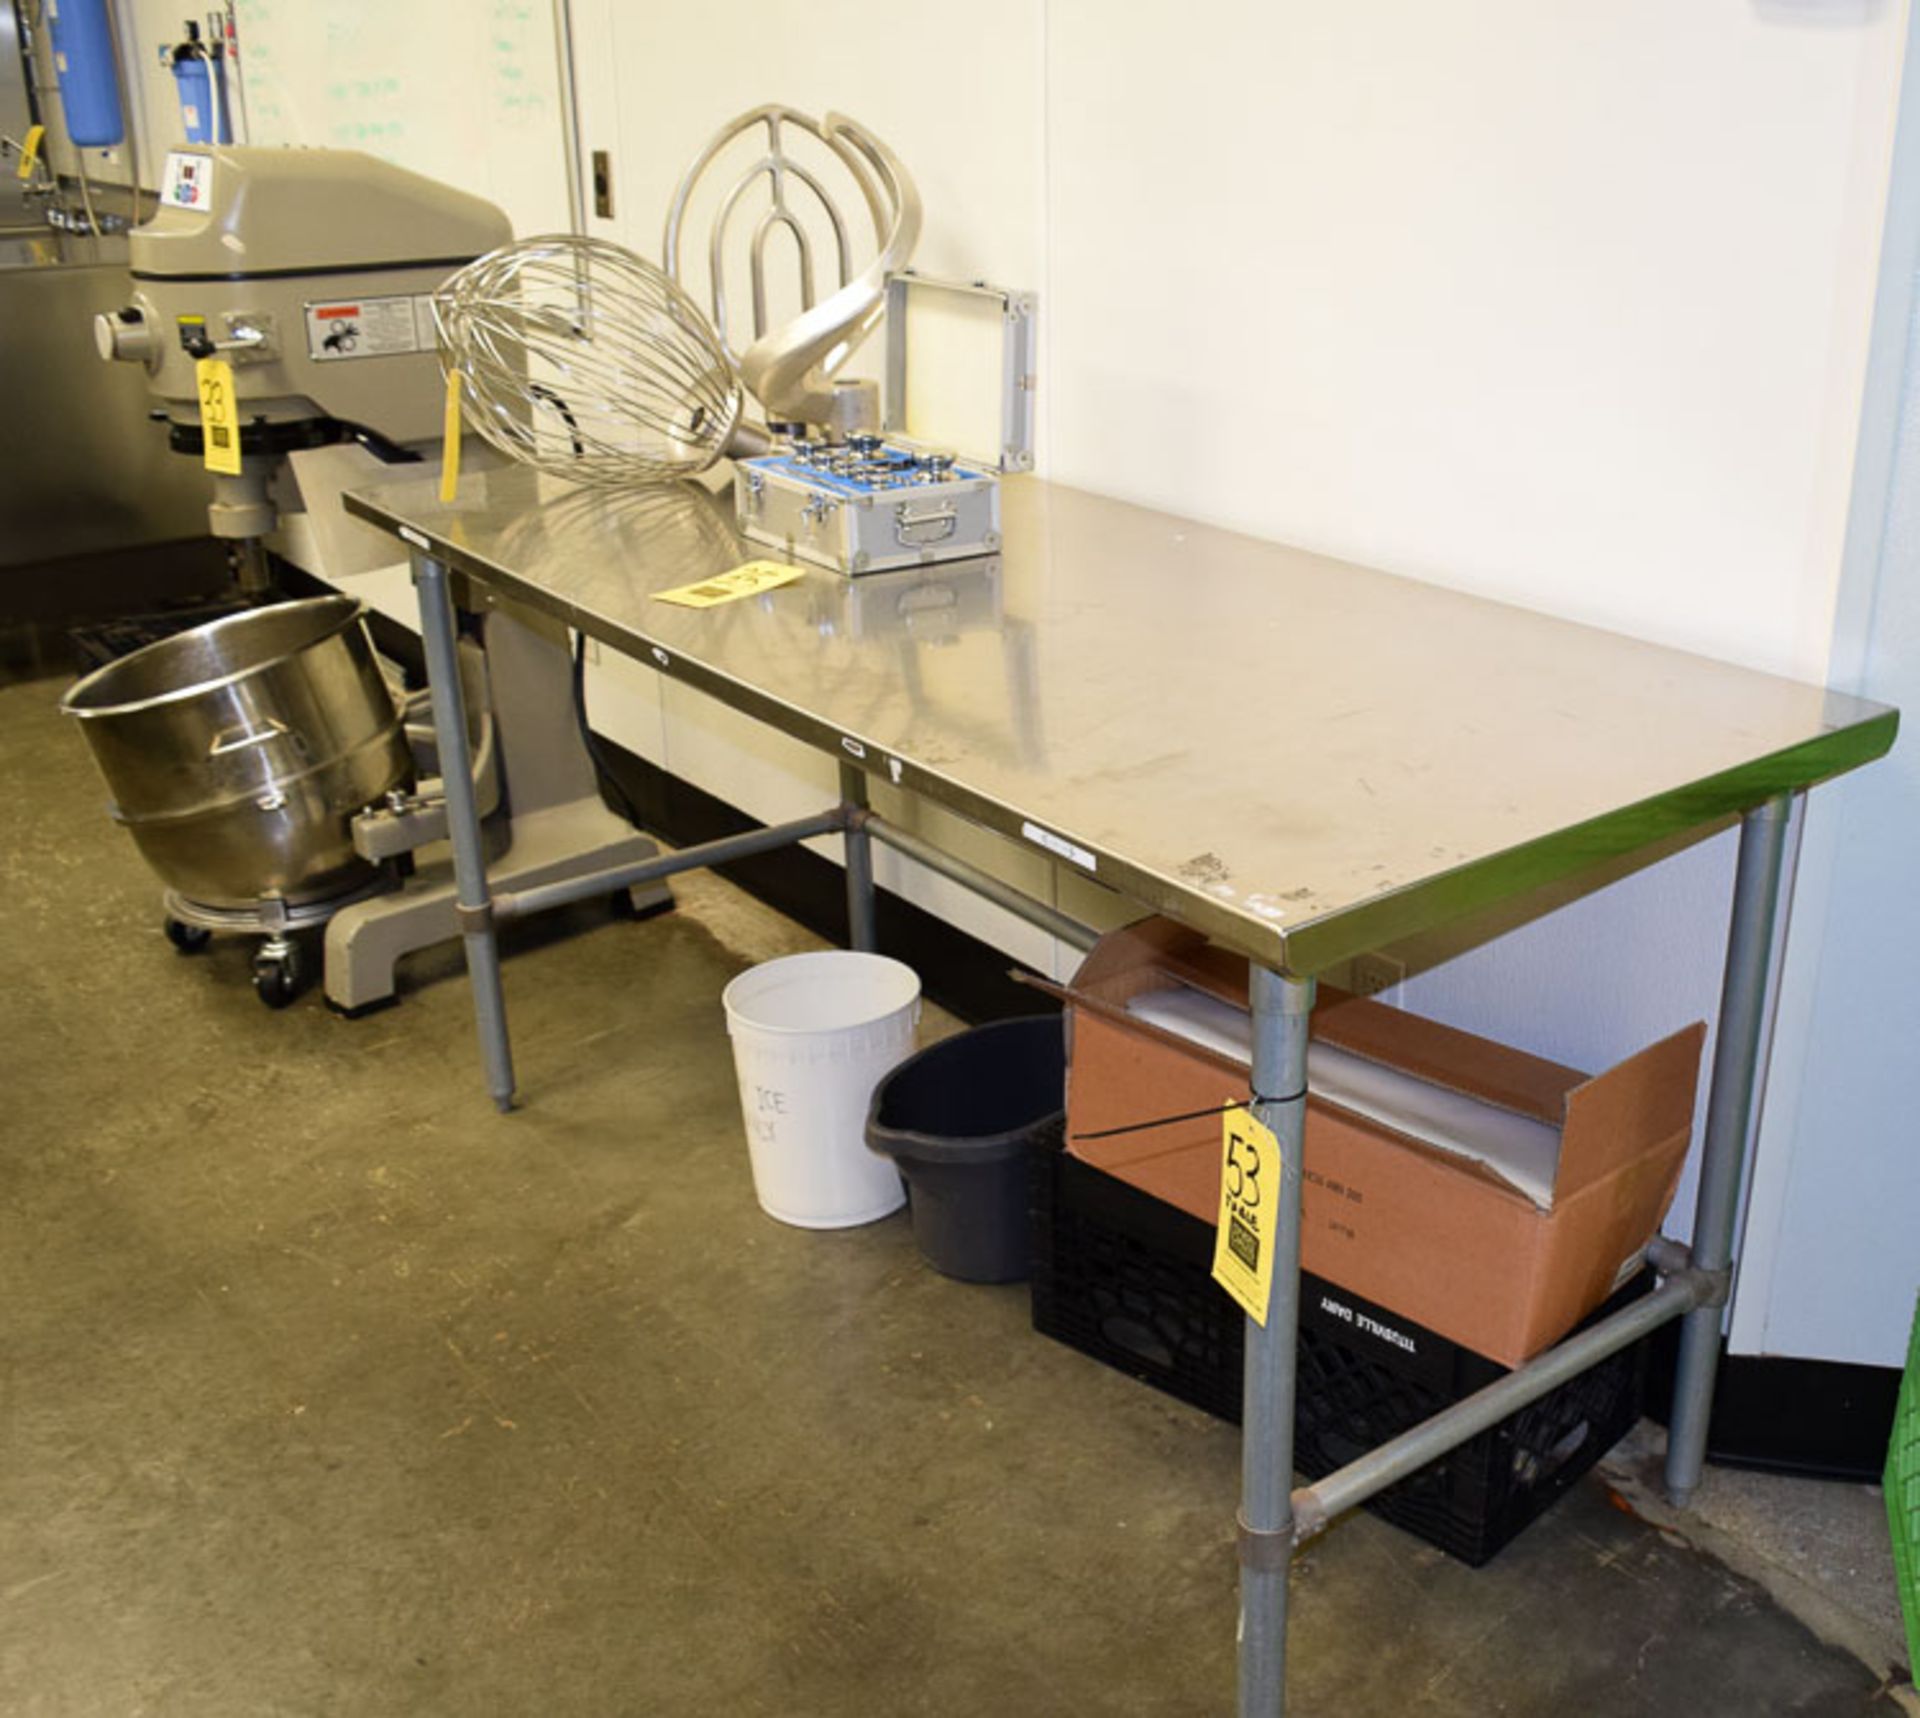 (2 pieces) 30" x 72" S/S Table and Whiteboard Rigging Fee $ 25